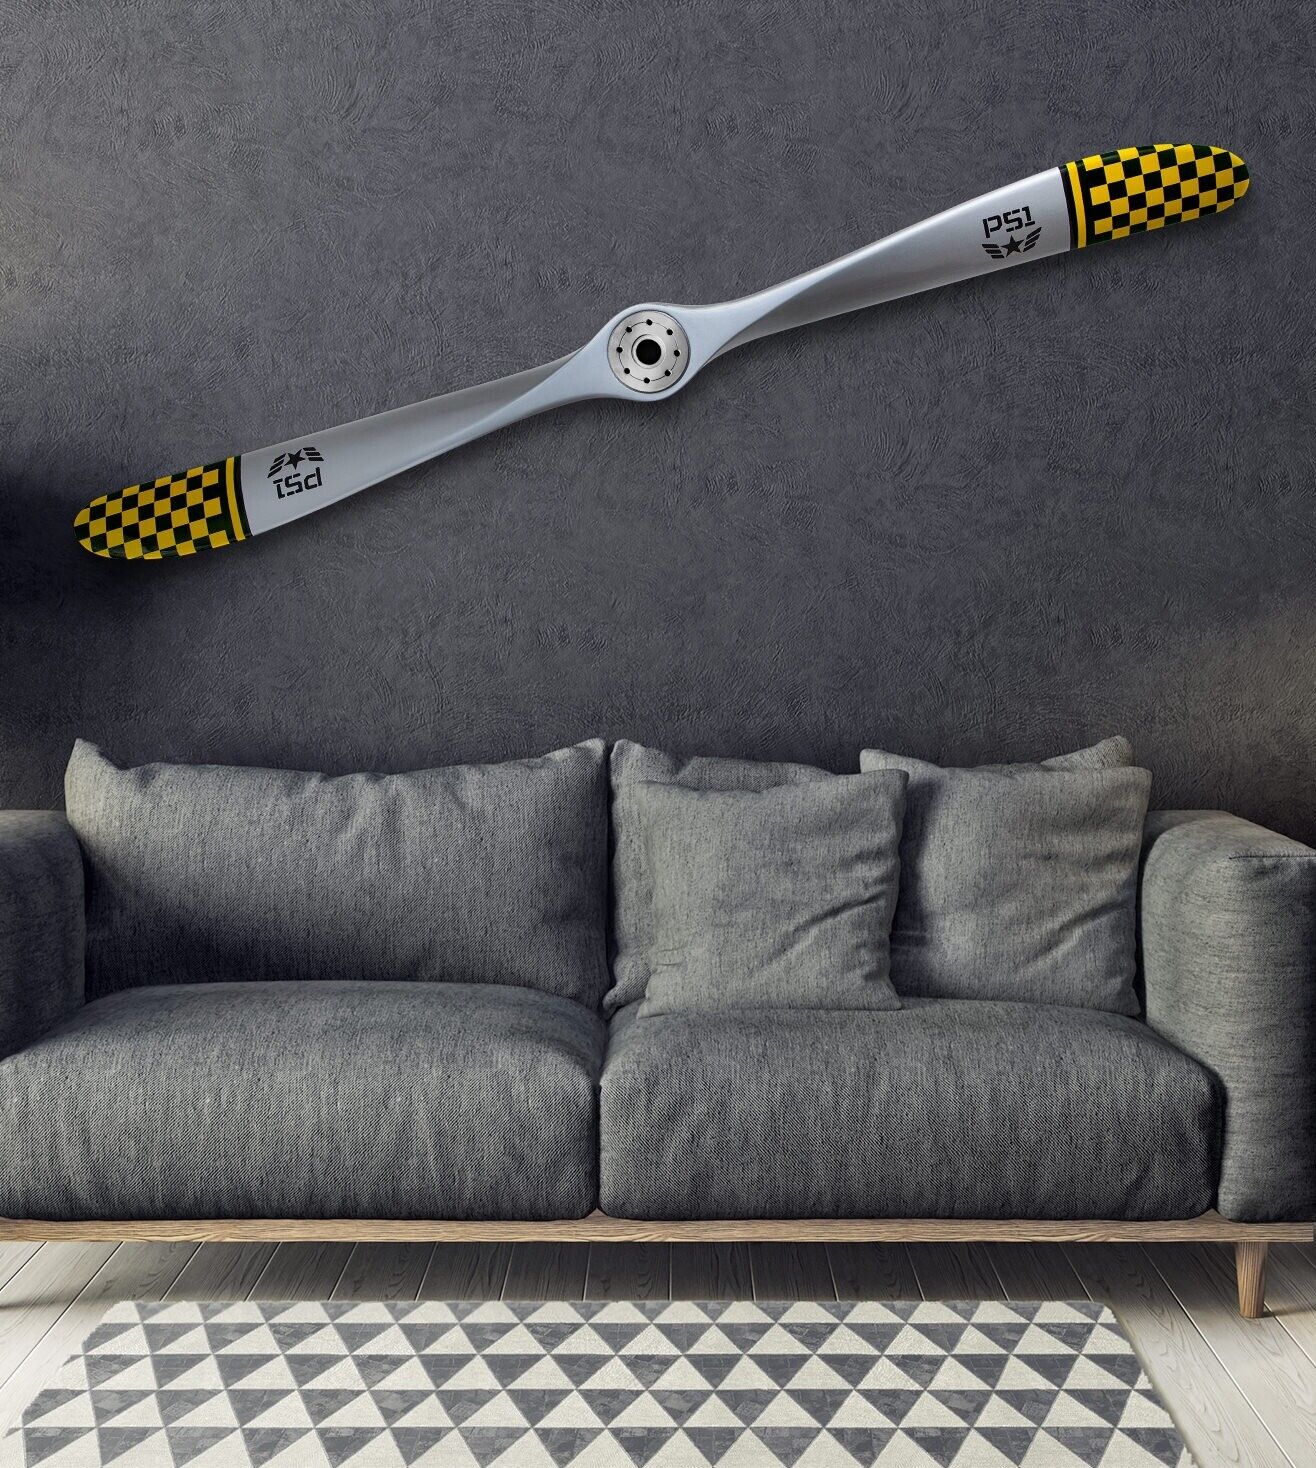 Wooden Airplane Propeller for Wall Decor P51 Mustang 6 feet by WoodFeather